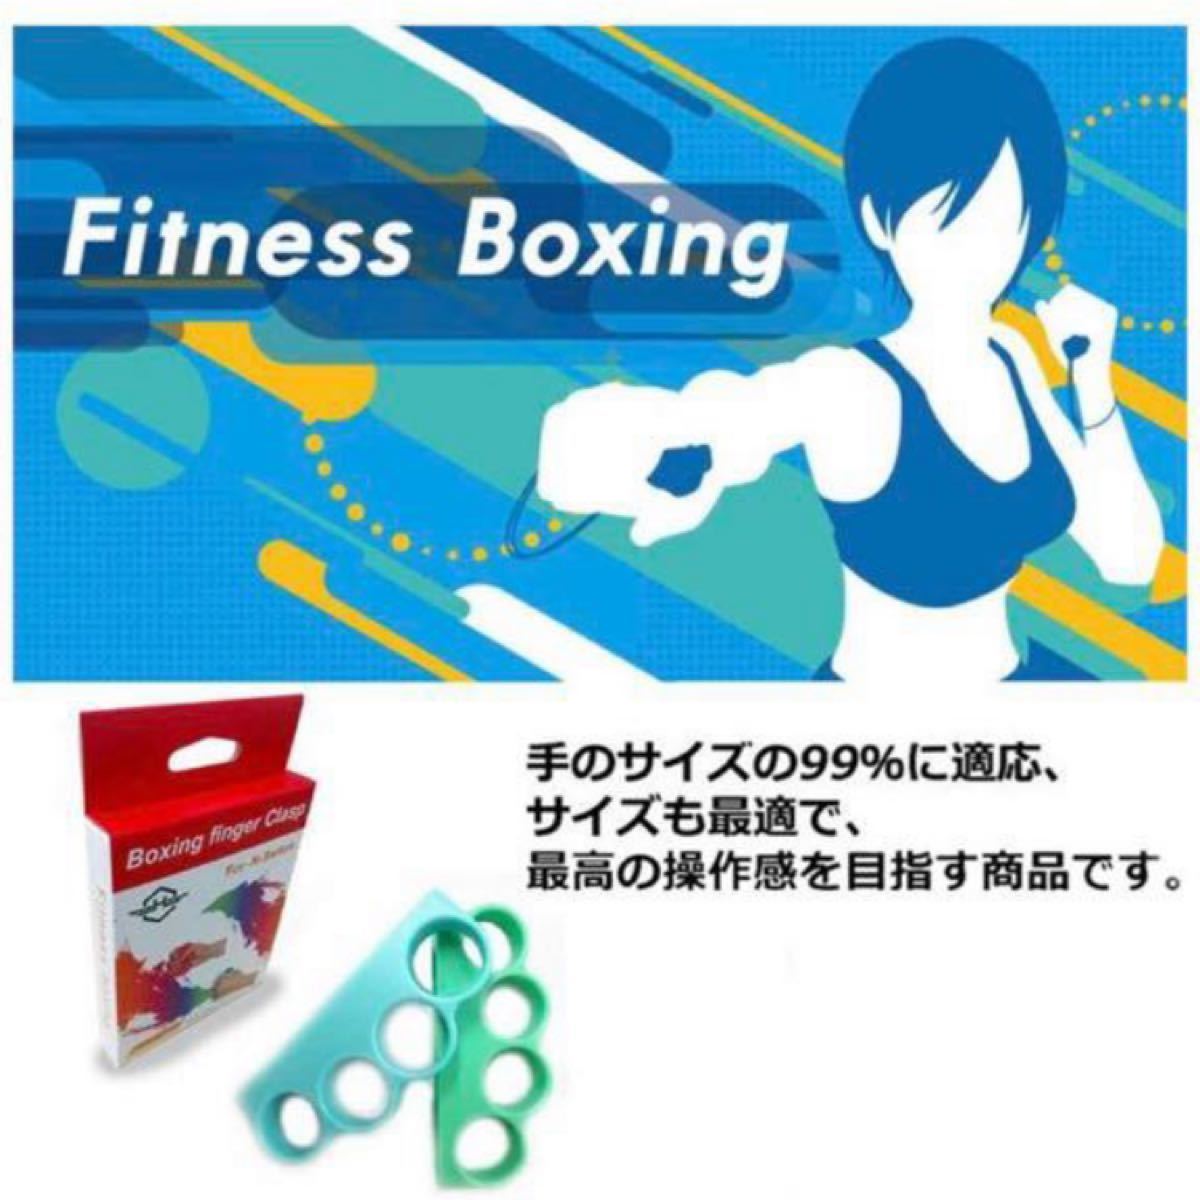 Fit Boxing/Fit Boxing 2 対応 コントローラー グリップ 2個 セット(青+緑)